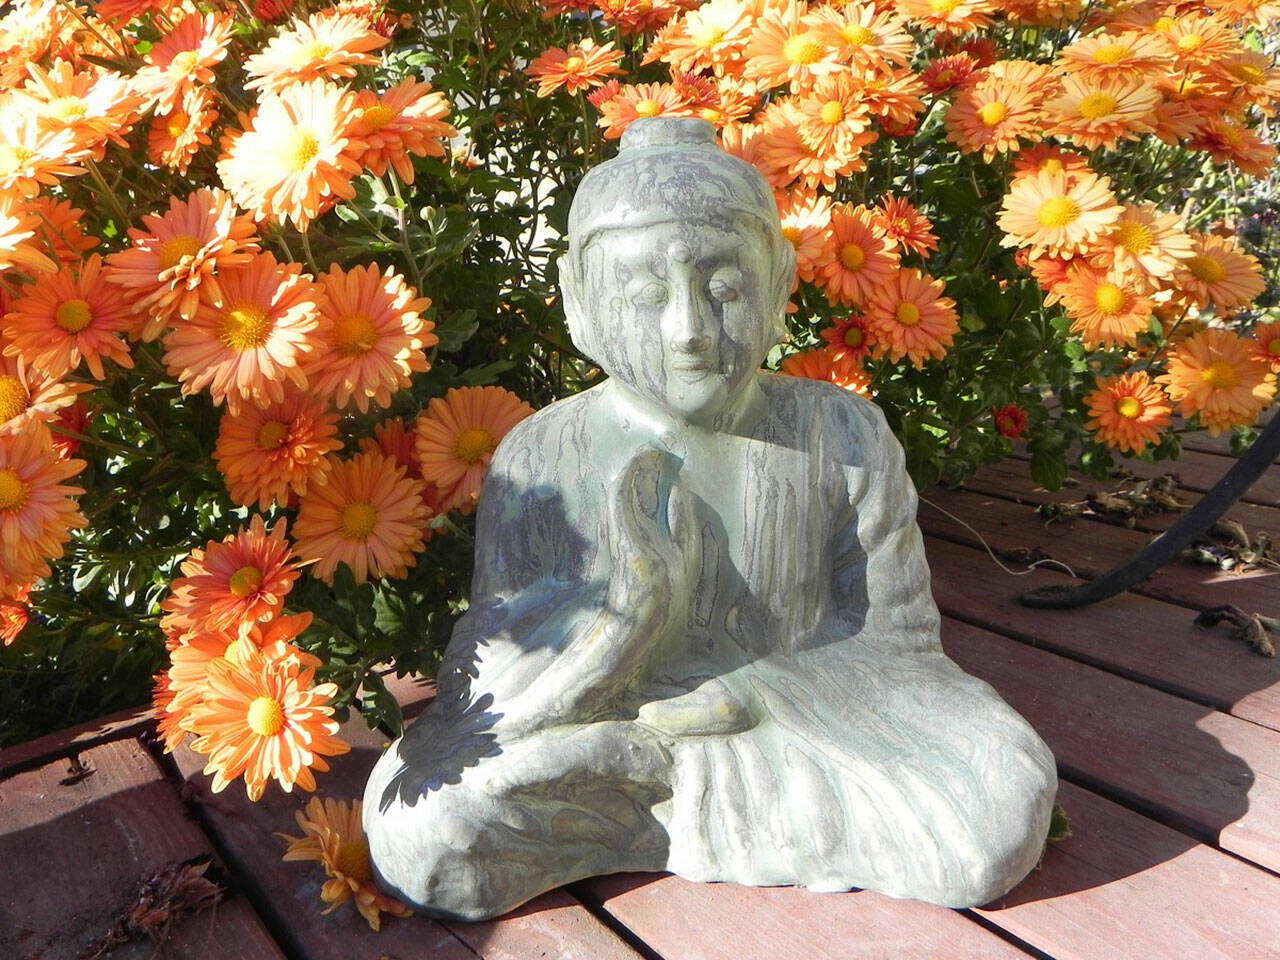 “Buddha” by Carol Janda, a featured artist at the Blue Whole Gallery’s exhibit “Gentle and Tranquil,” showing this November. Submitted photo